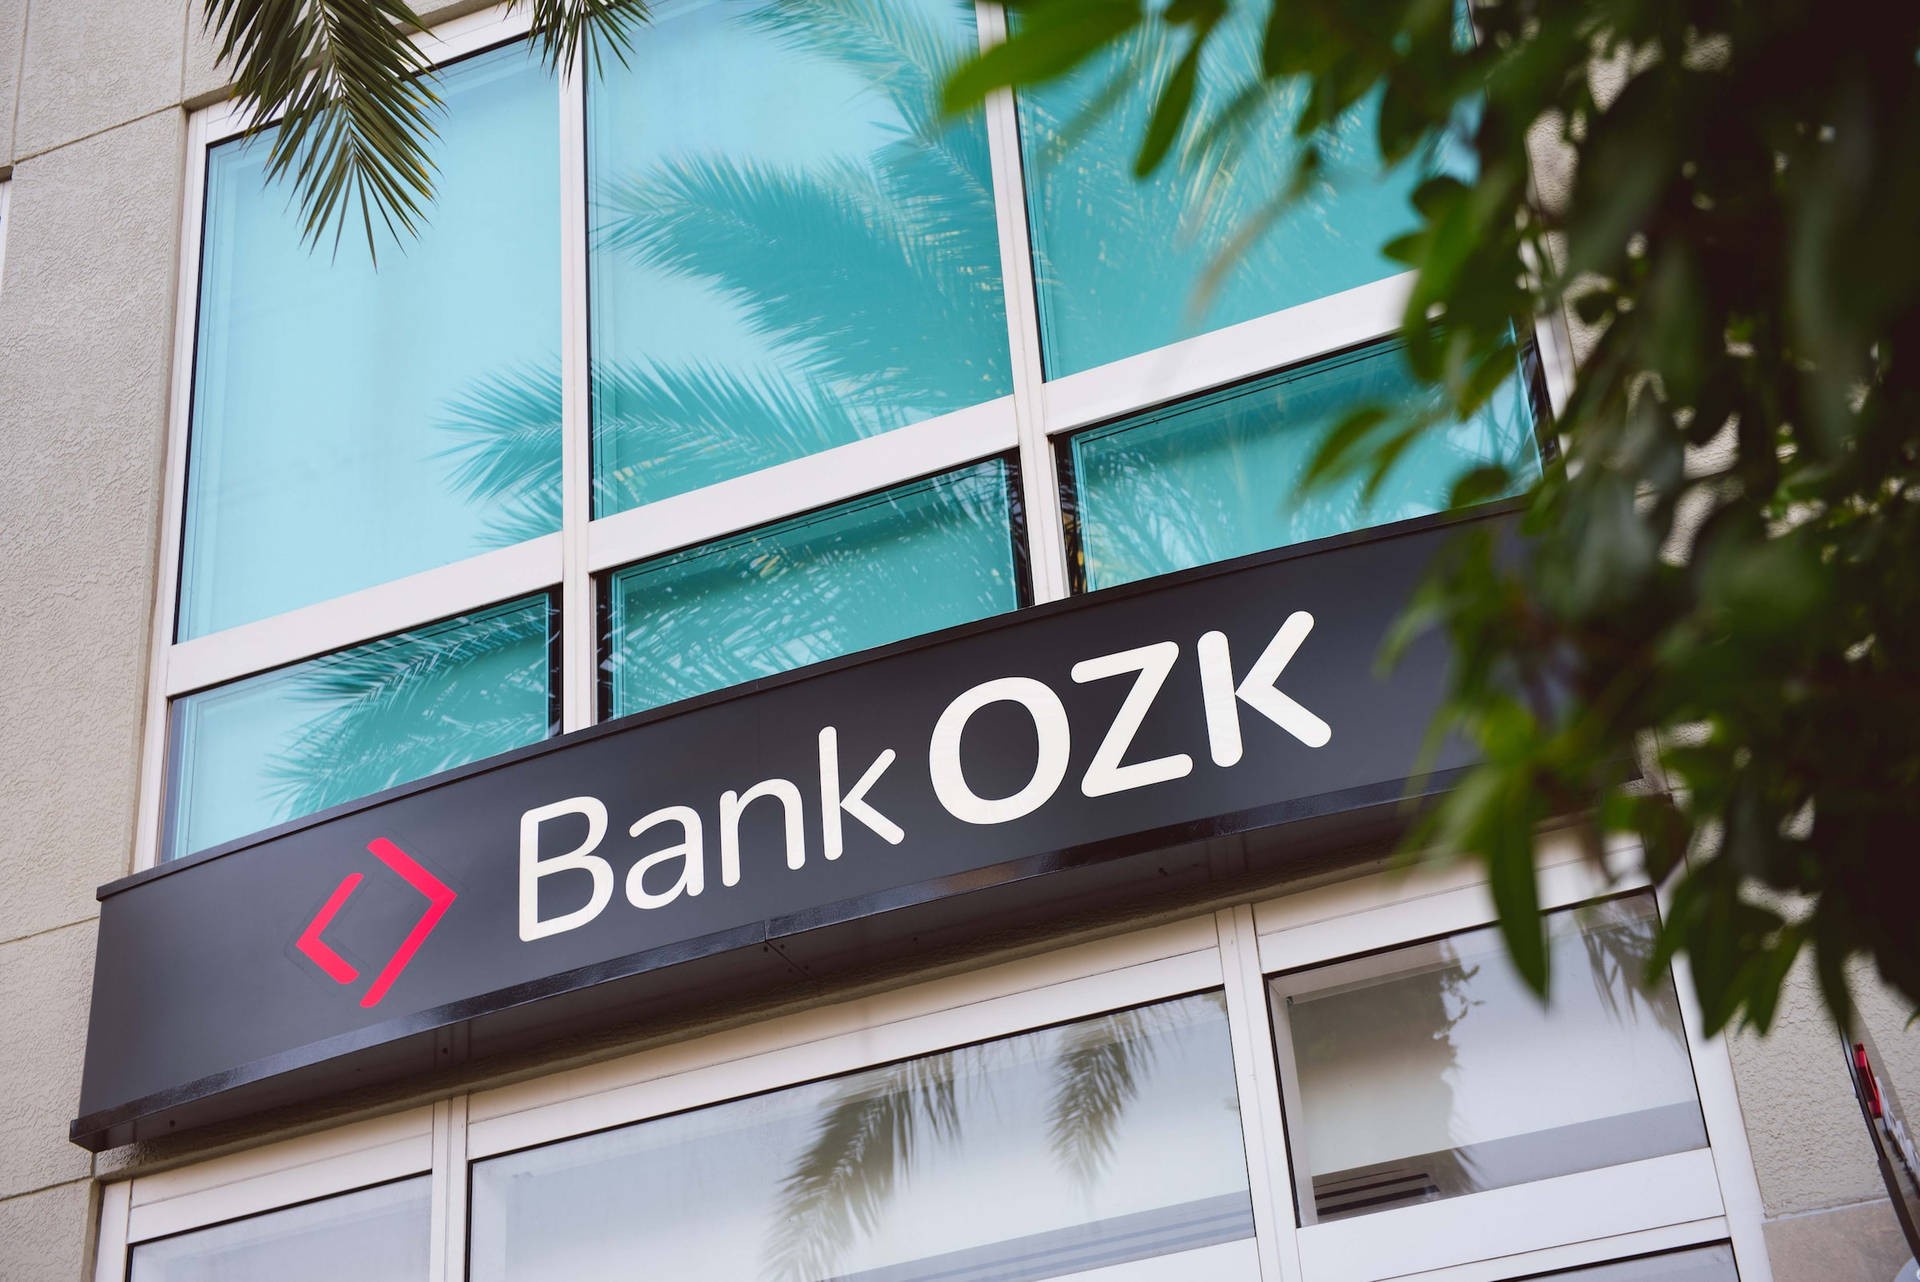 12-intriguing-facts-about-bank-ozk